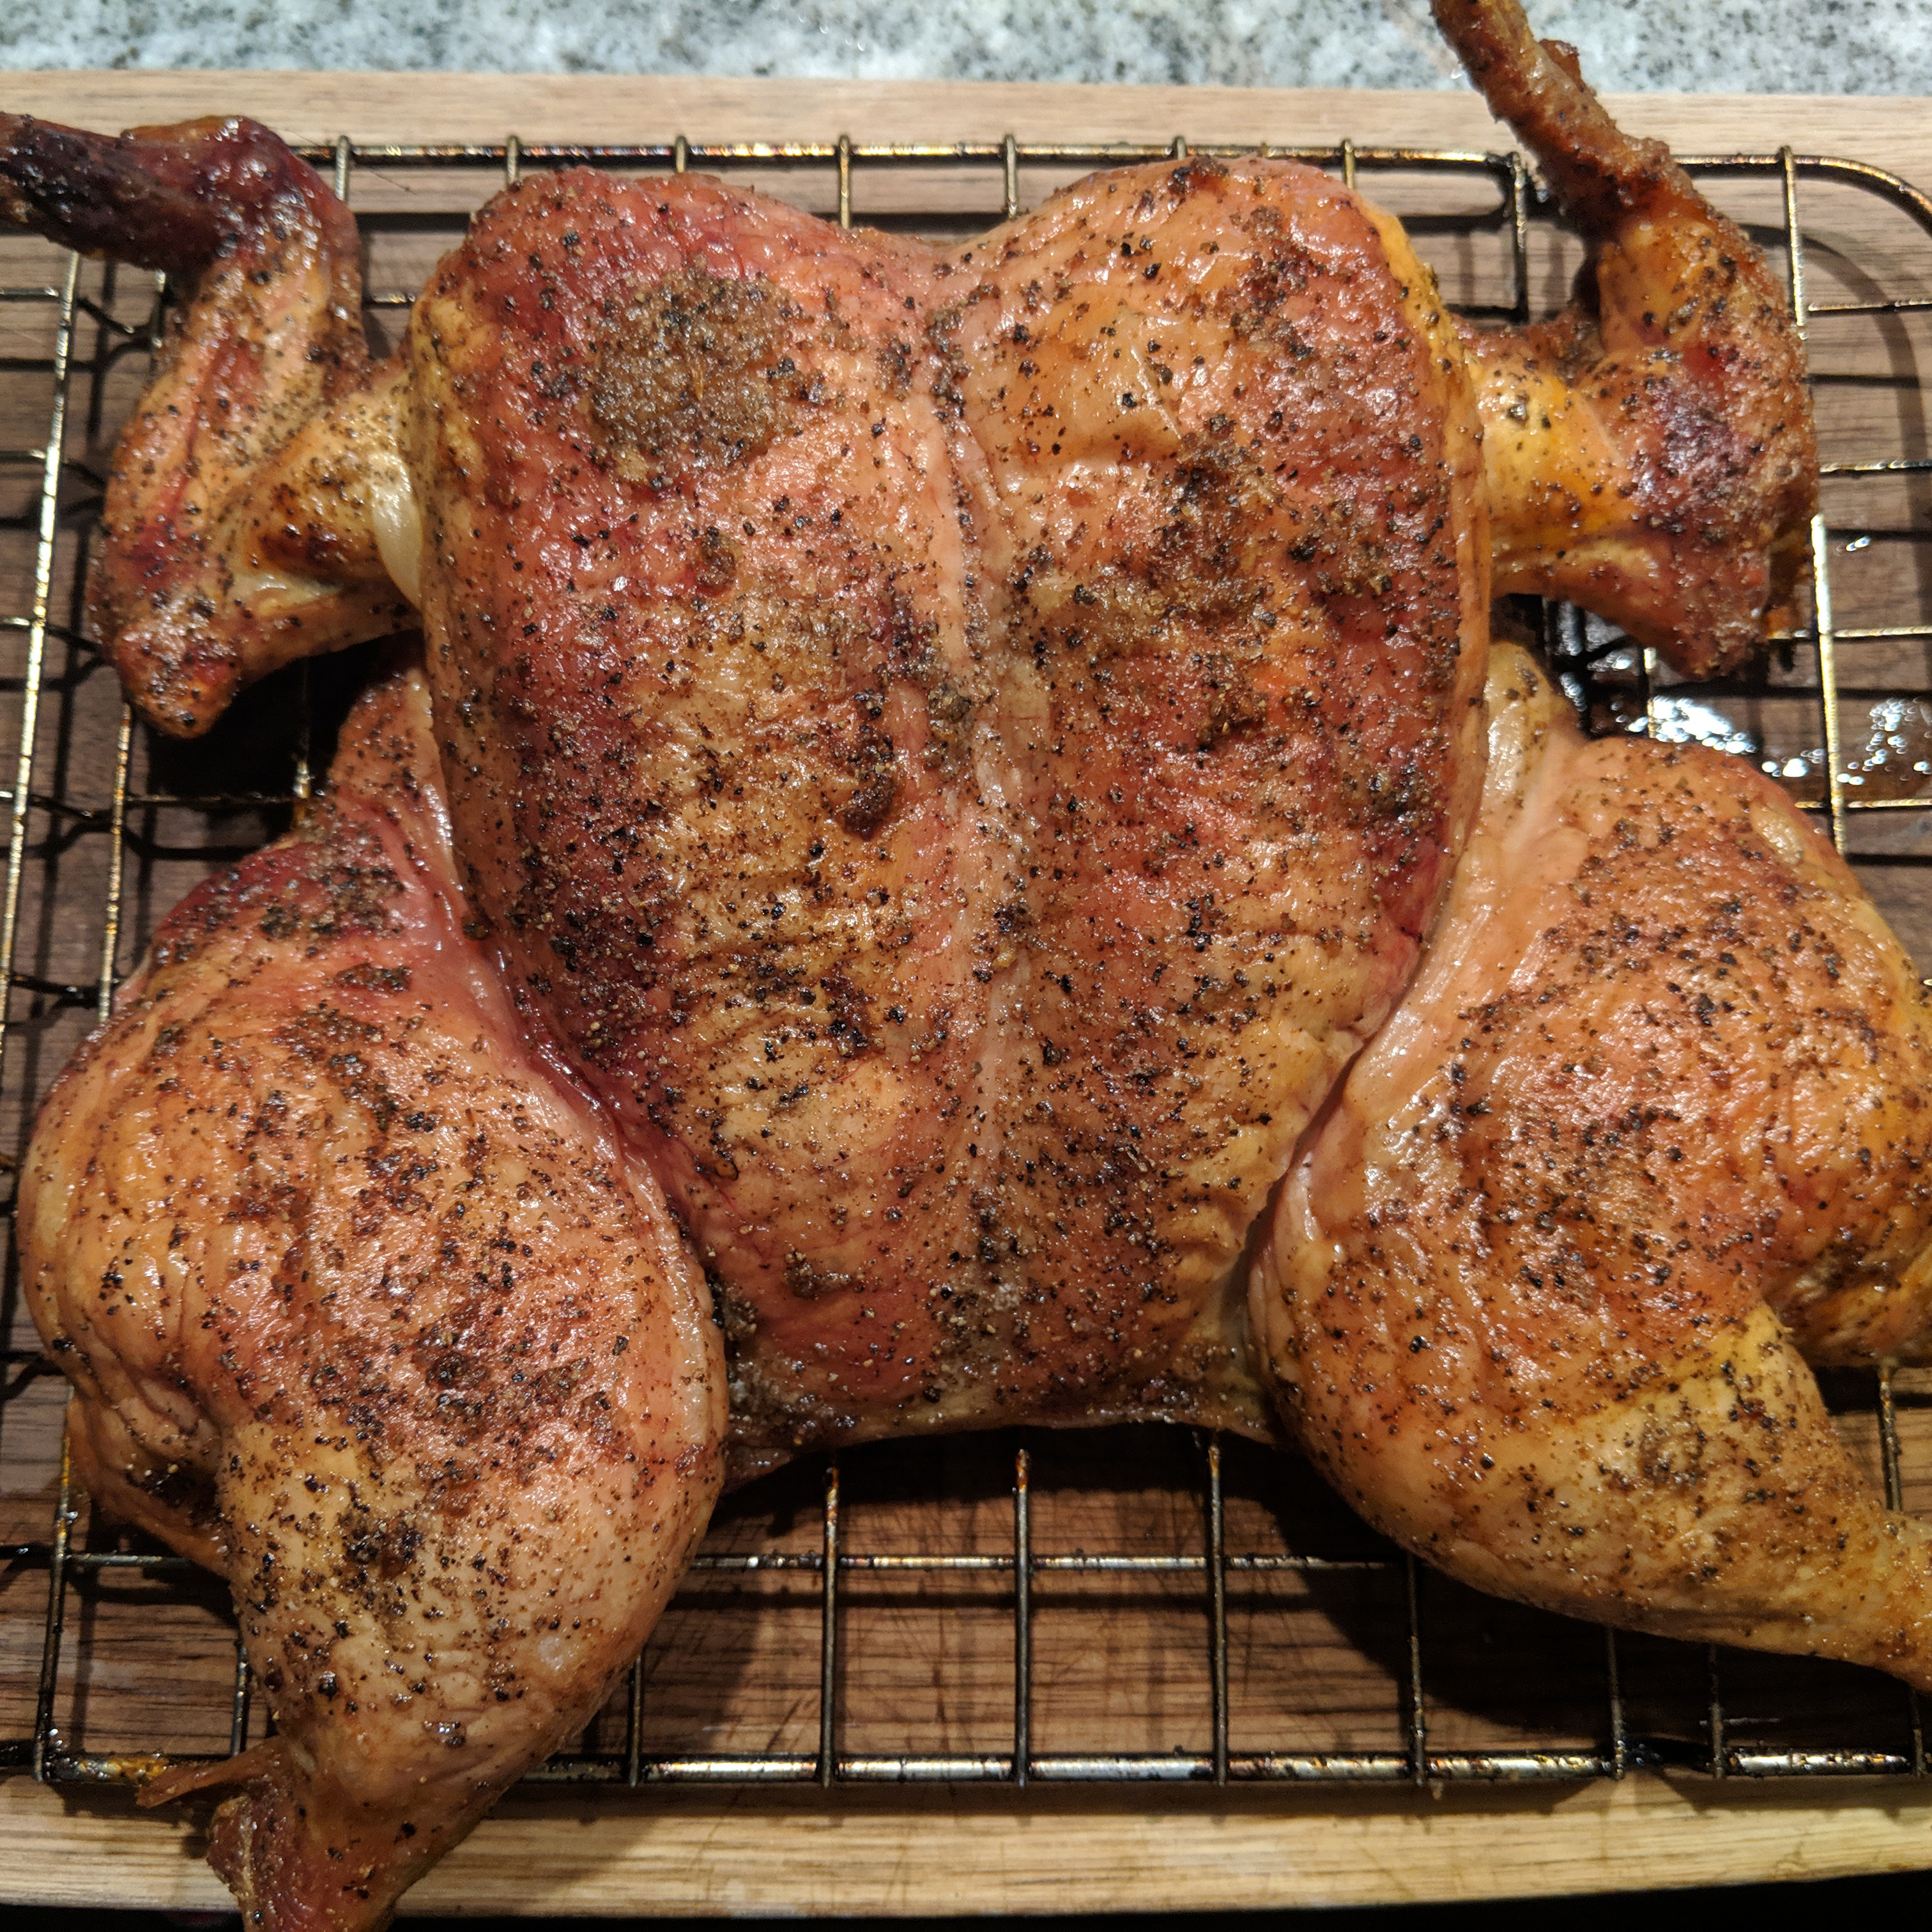 A smoked chicken, one of my earliest.